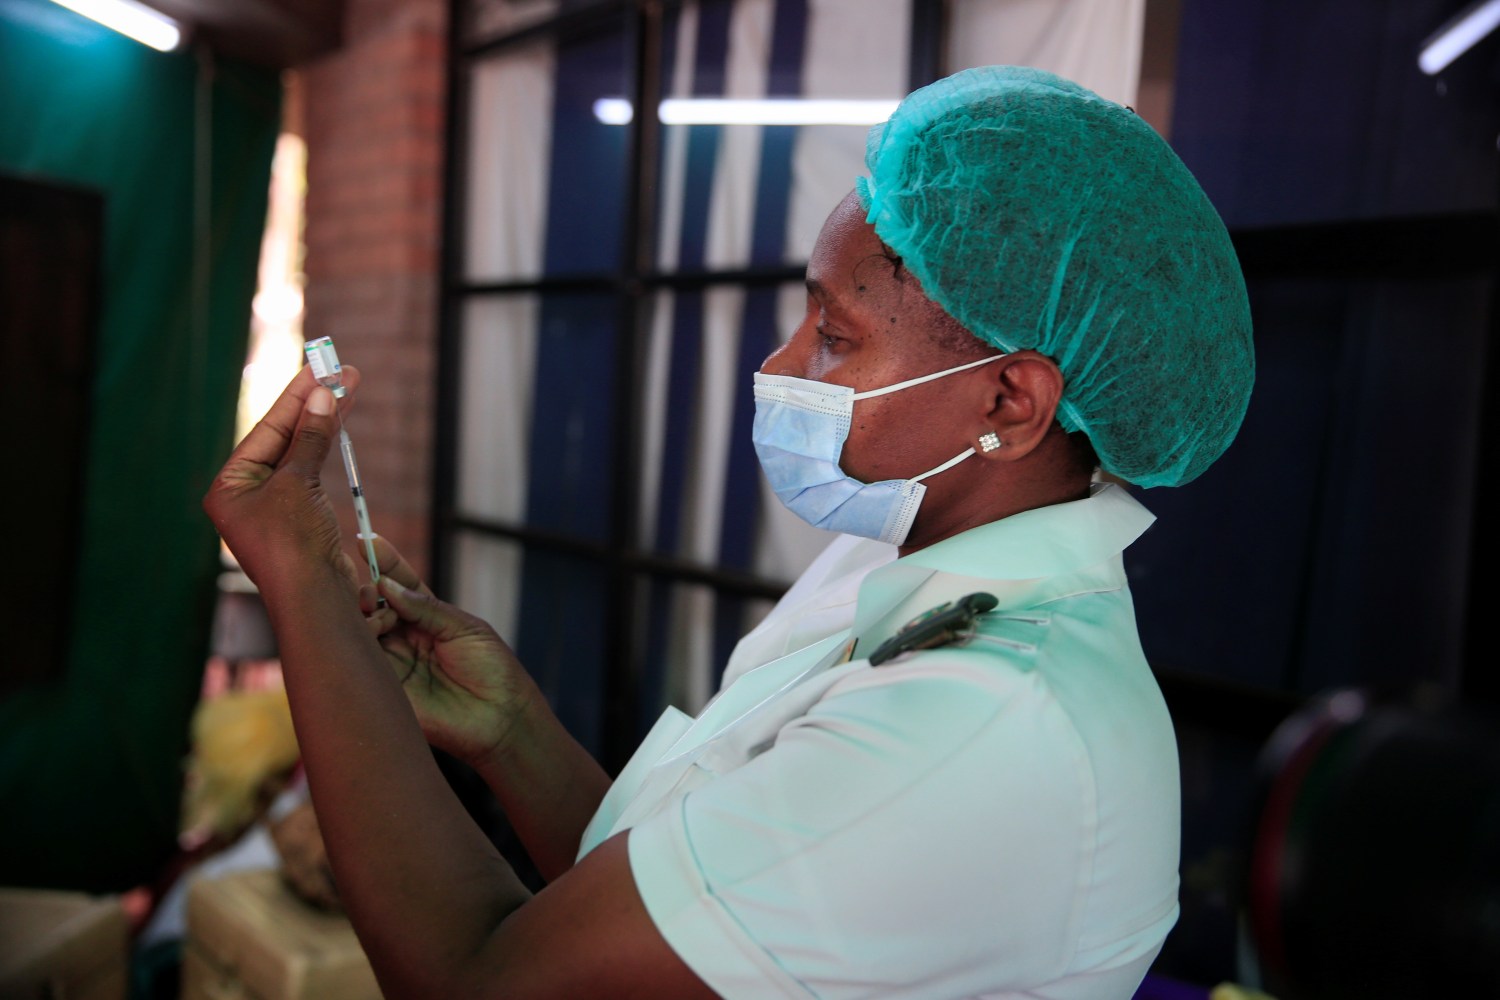 A nurse prepares a dose of the Sinopharm coronavirus disease (COVID-19) vaccine at Wilkins Hospital in Harare, Zimbabwe, March 24, 2021. REUTERS/Philimon Bulawayo